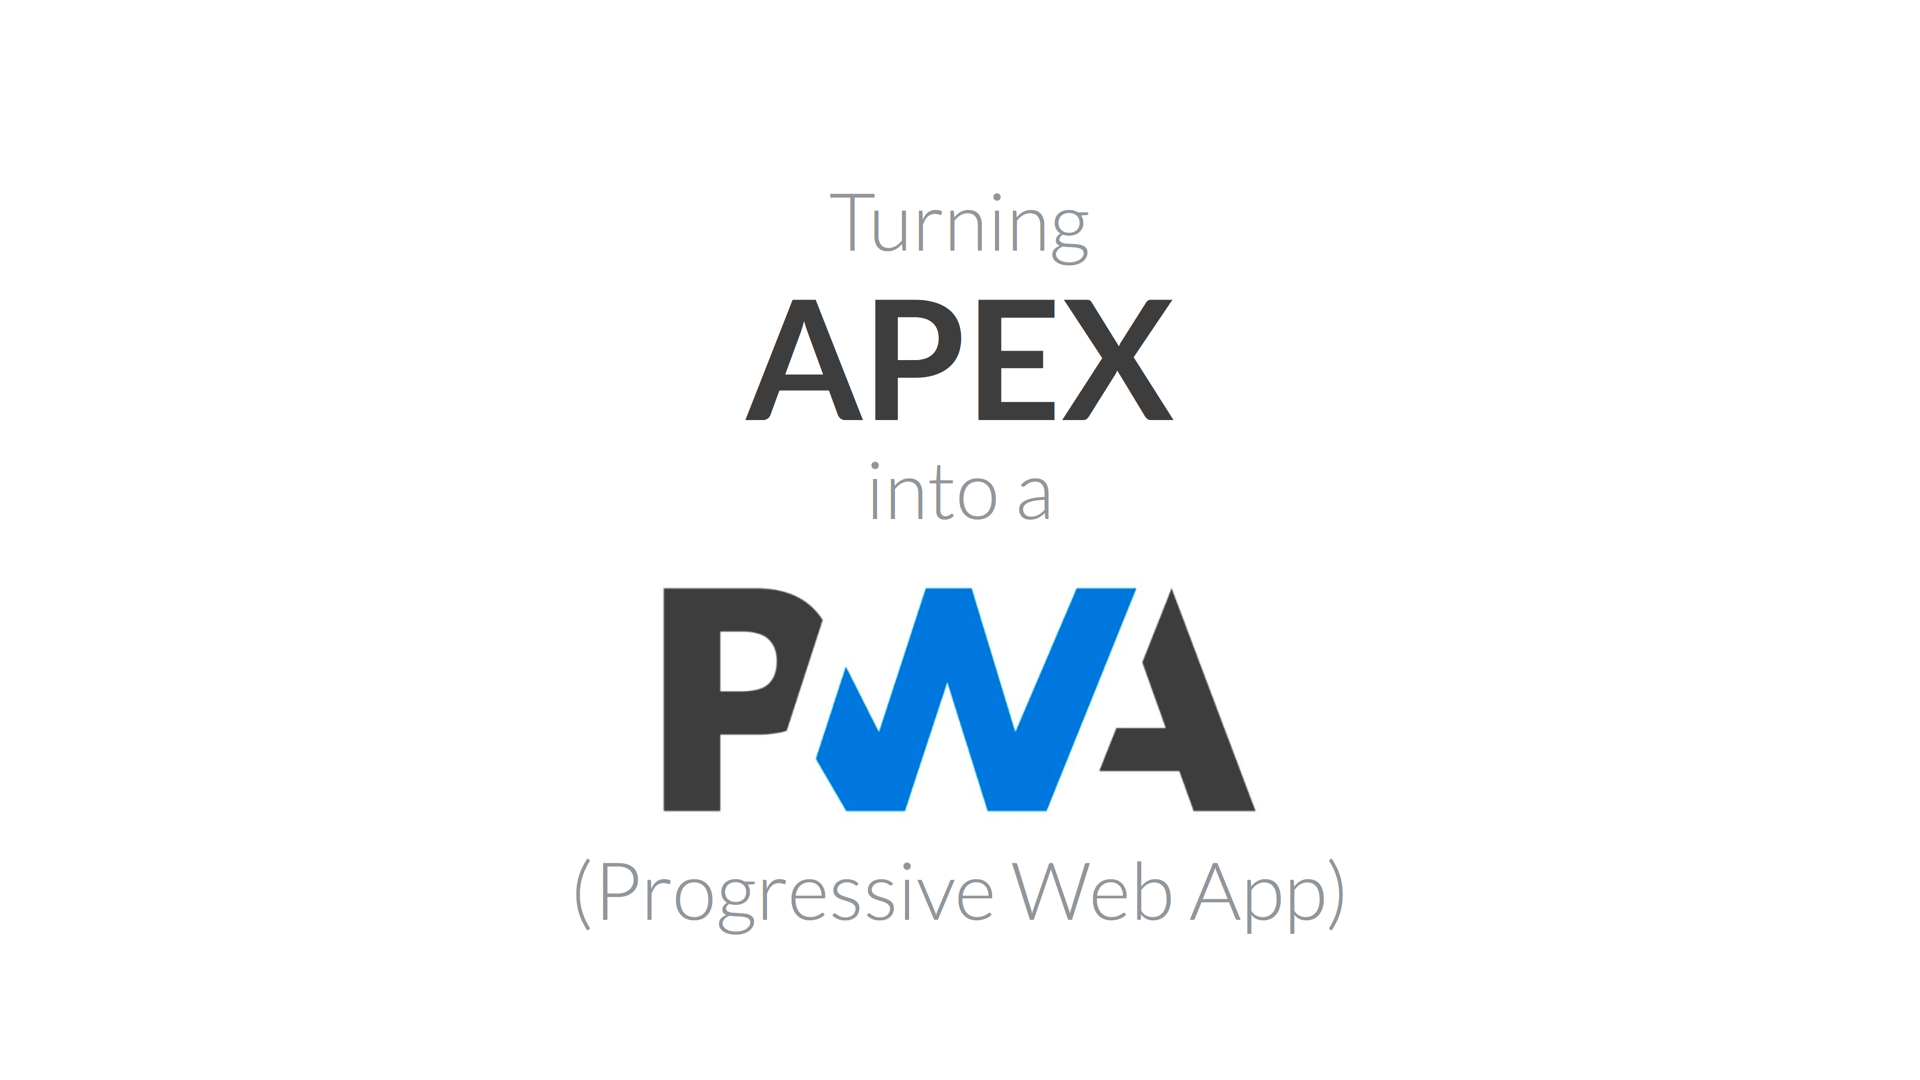 APEX as a PWA: The Complete Guide